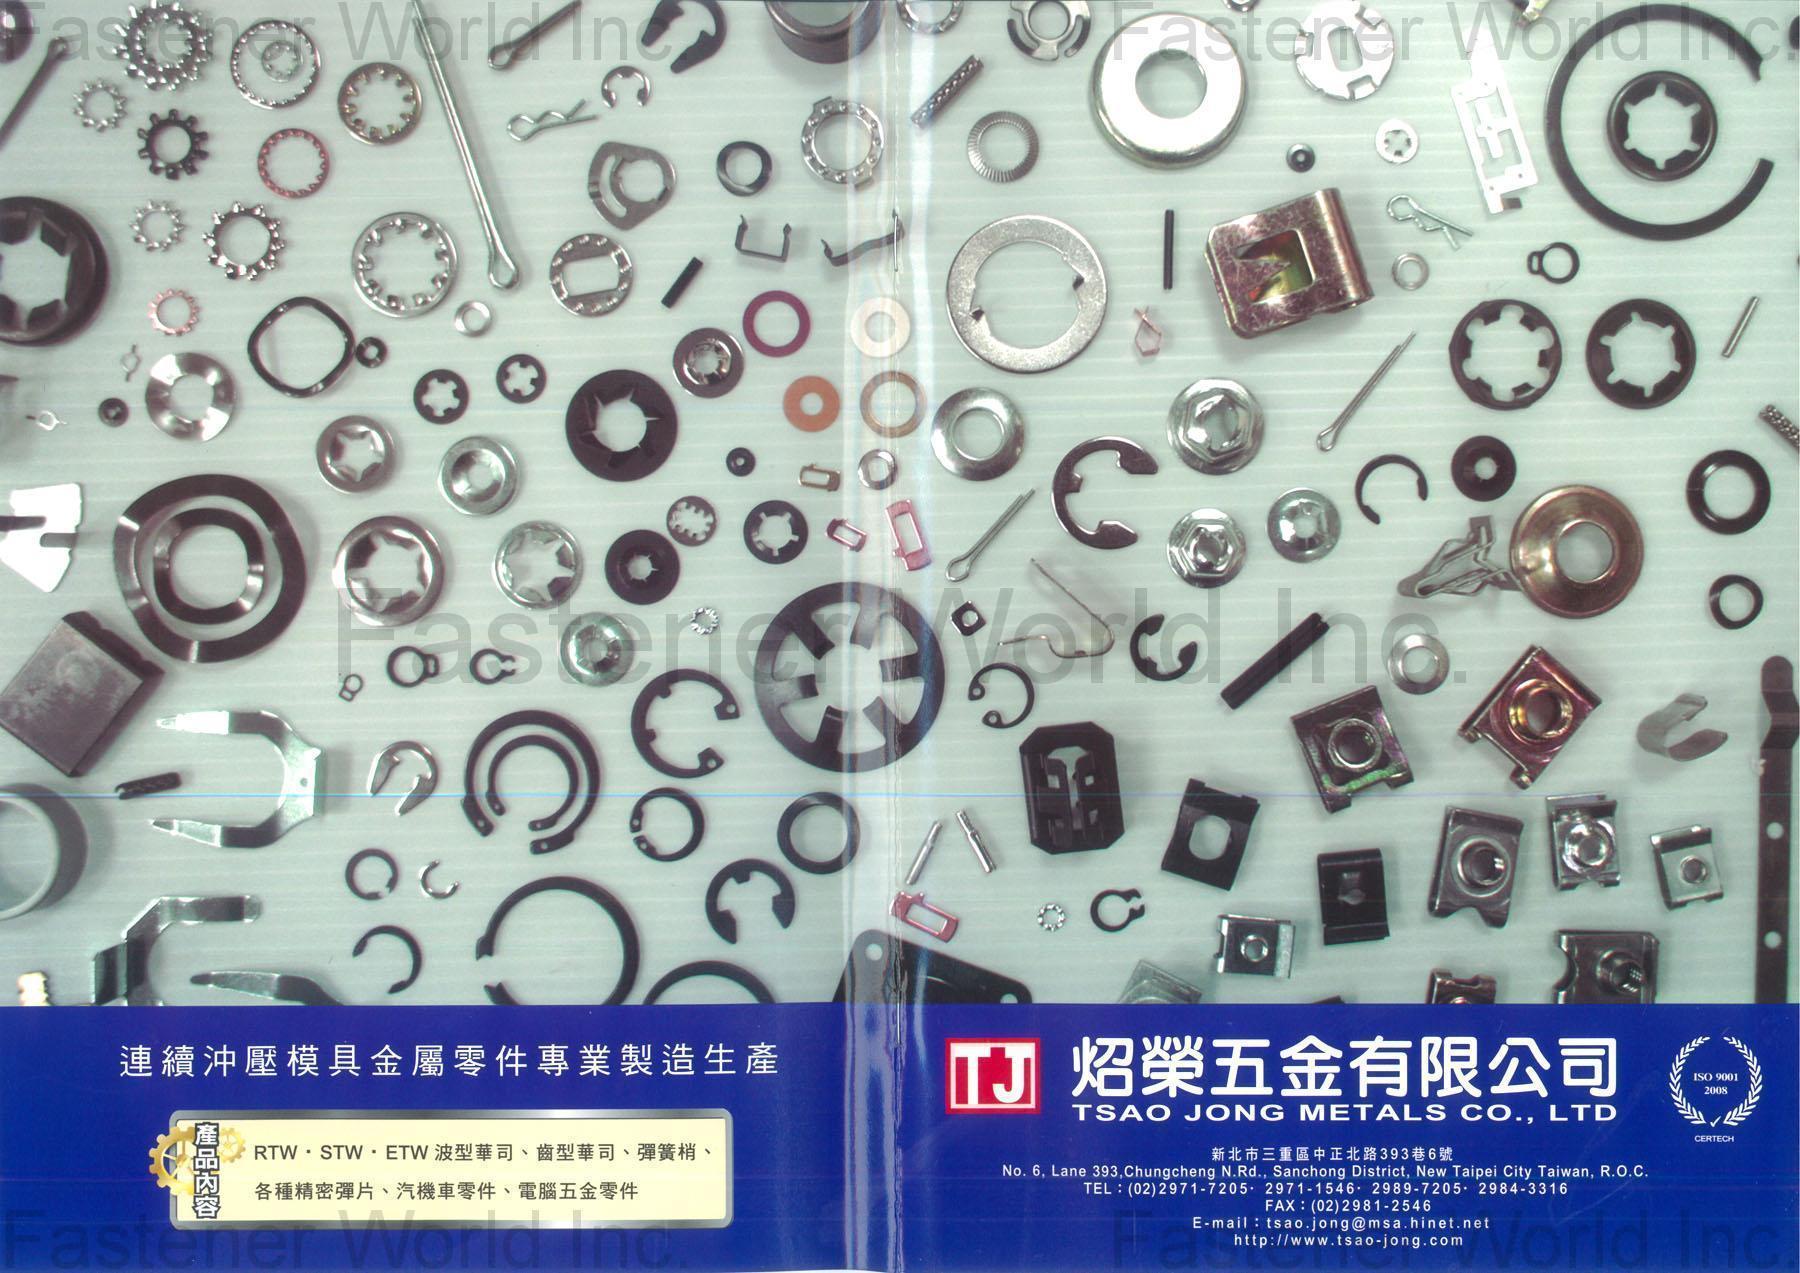 TSAO JONG METALS CO., LTD. , RTW INTERNAL RETAINING RINGS / CIRCLIPS, MB Curved Washer / Belleville spring, SPN Self-Locking External, CSTW Circular External, ETW E-Ring / Circlips, AW Toothed Lock Washer Internal, BW Toothed Lock Washer External, DB Disc Spring conical spring washer, Belleville spring, USN U-type plate nut , Toothed Washers